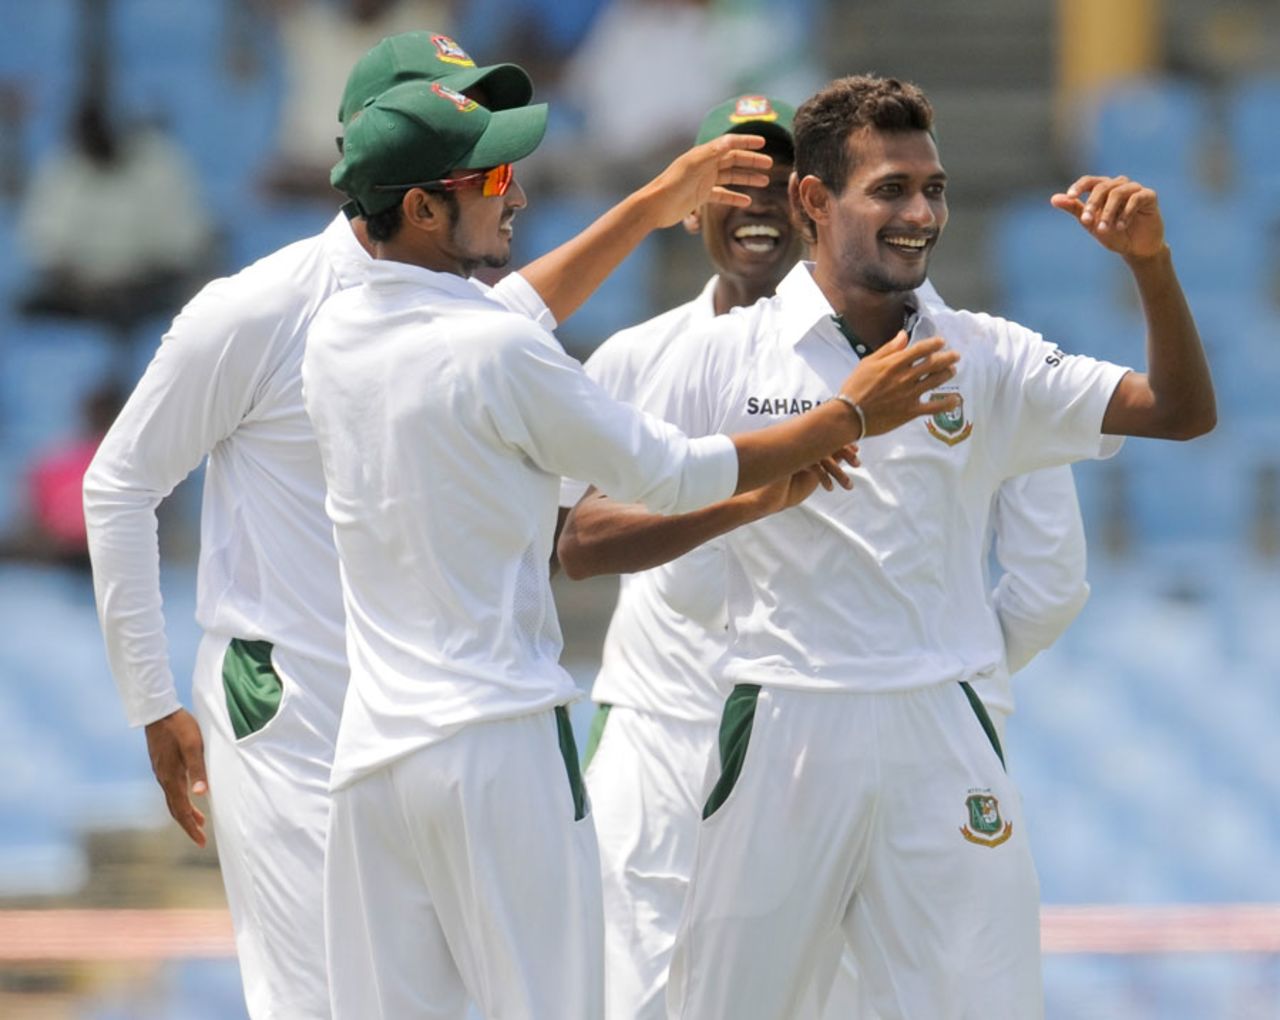 Shafiul Islam is overjoyed after taking a wicket, West Indies v Bangladesh, 2nd Test, St. Lucia, 2nd day, September 14, 2014